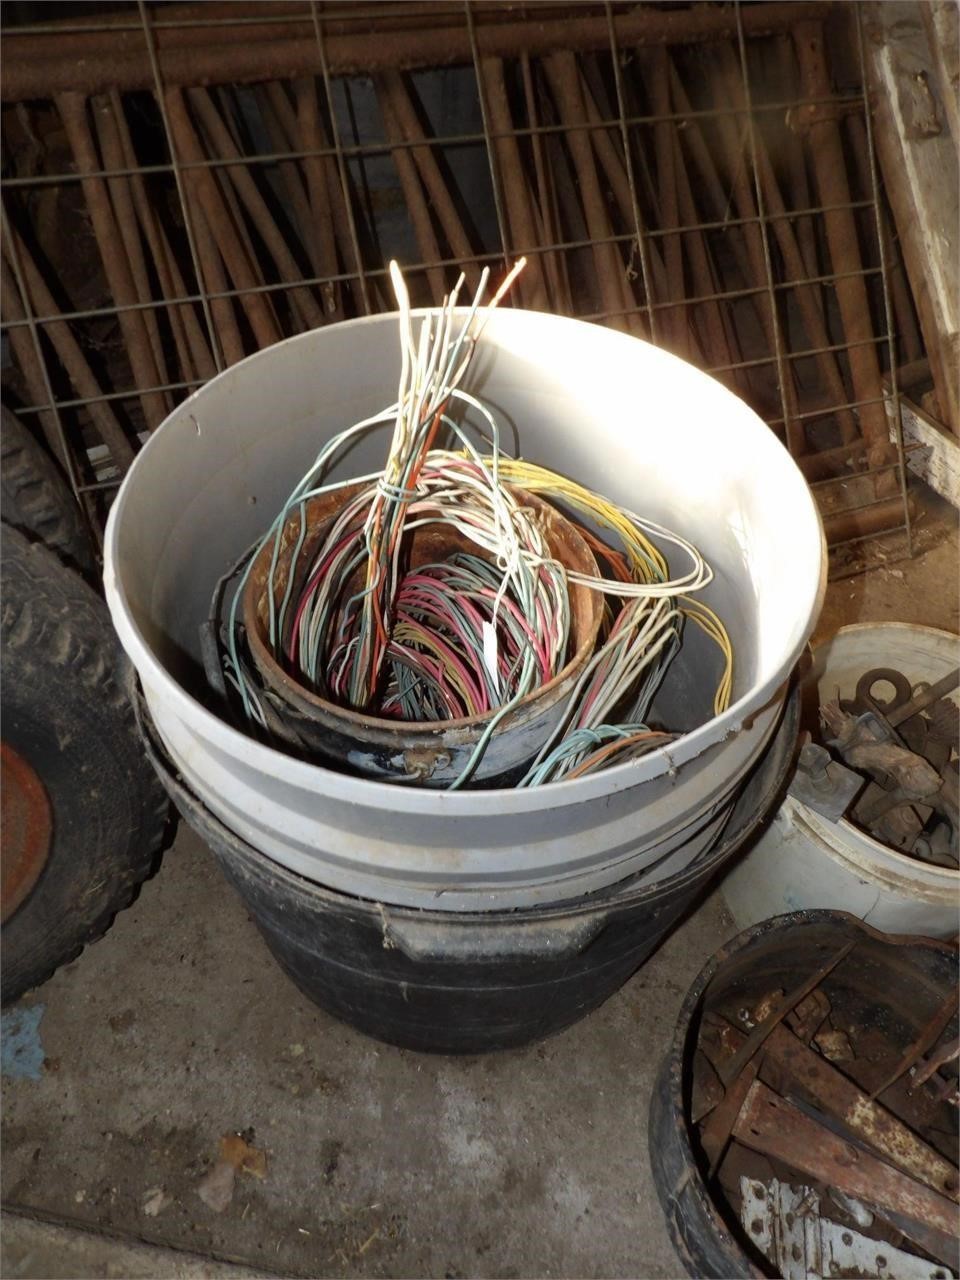 SCRAP WIRE AND BUCKETS